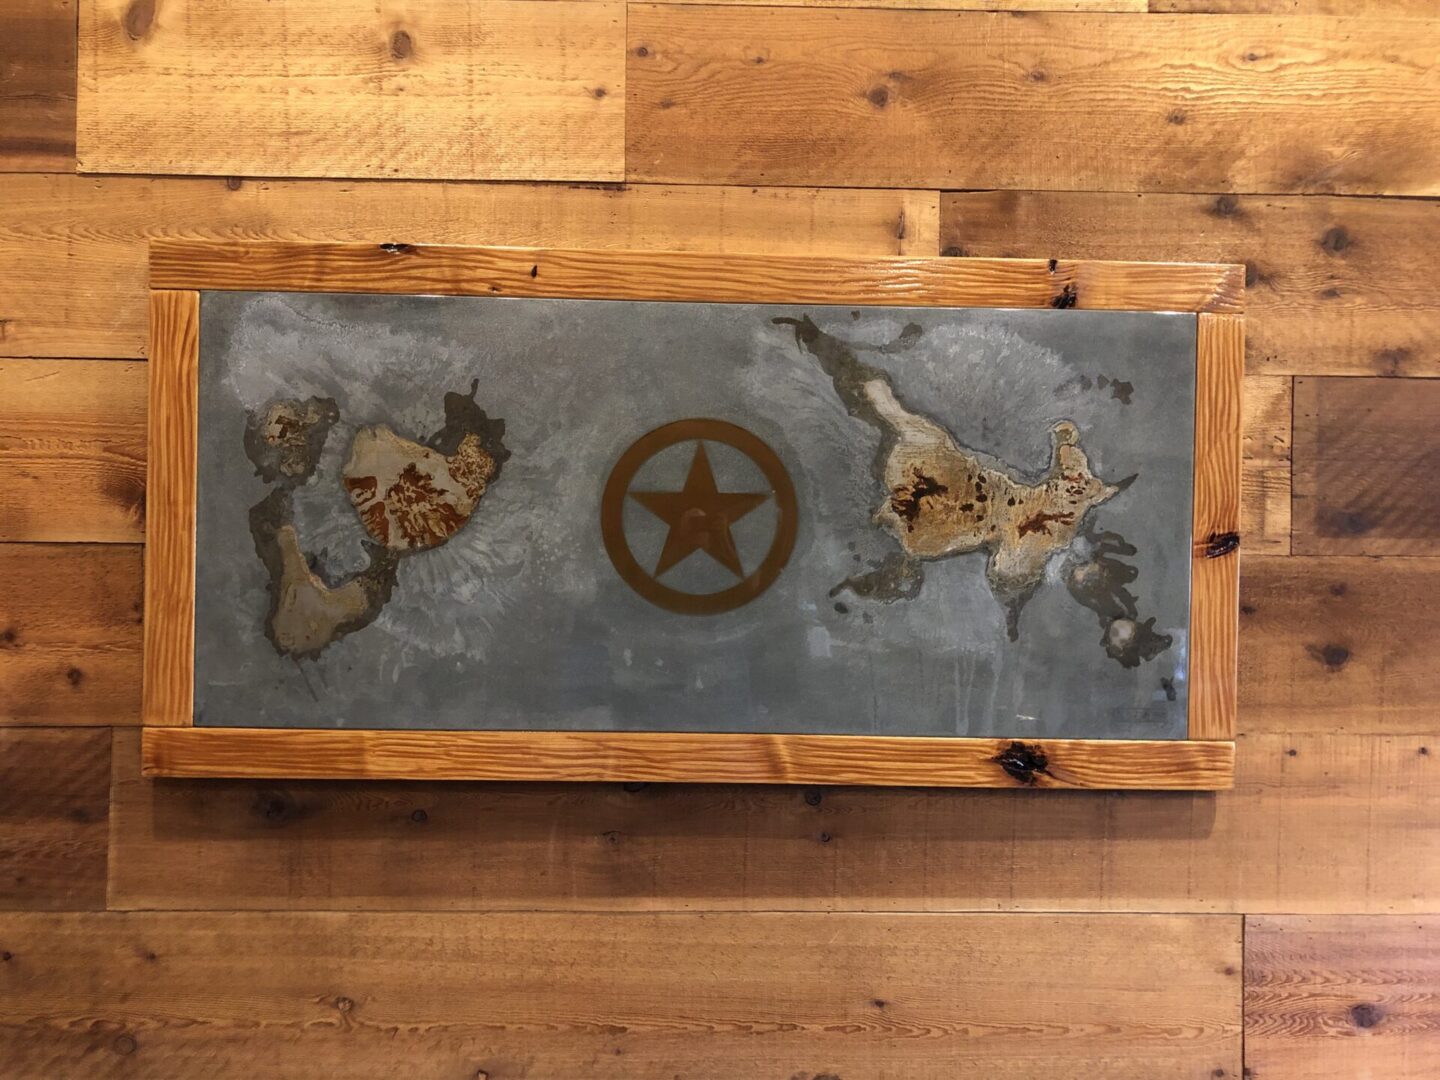 Lone Star is a beautiful wall art by Hawthorne Tables